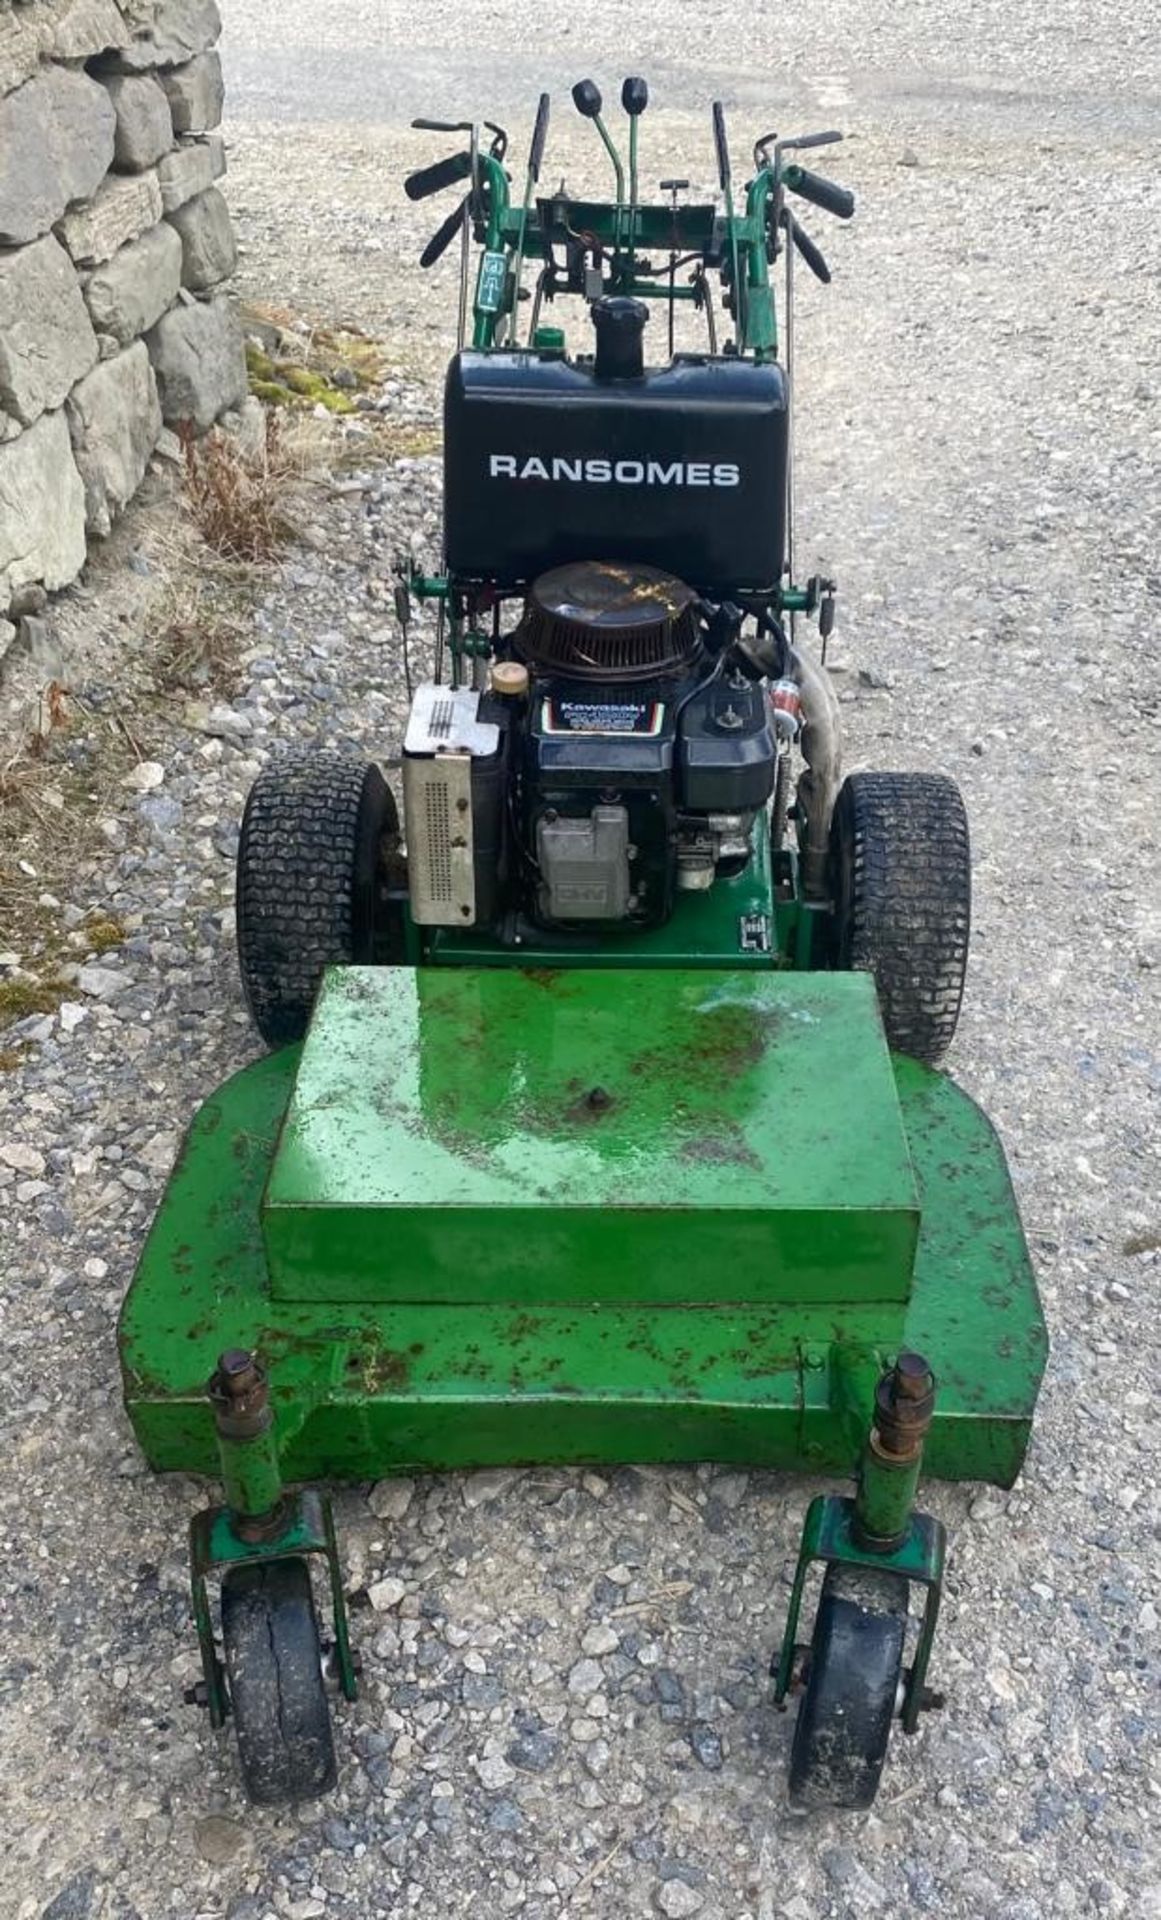 RANSOMES PEDESTRIAN MOWER - Image 2 of 9